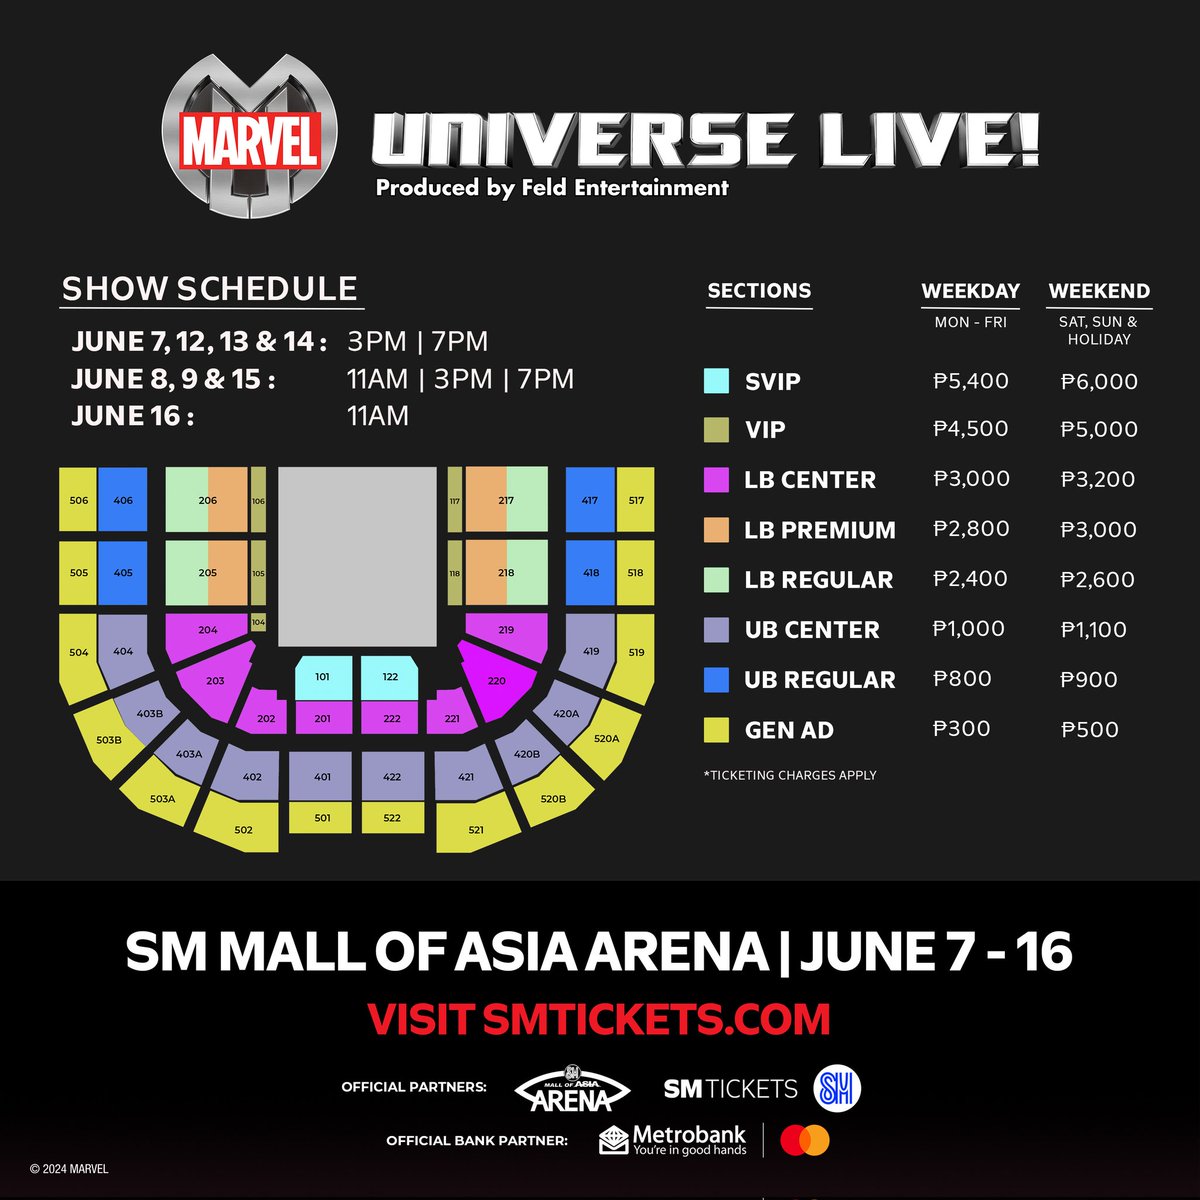 Get ready for an epic adventure as #MarvelUniverseLIVE! lands at the SM Mall of Asia Arena! 𝗧𝗶𝗰𝗸𝗲𝘁𝘀 𝗴𝗼 𝗼𝗻-𝘀𝗮𝗹𝗲 𝗼𝗻 𝗠𝗮𝗿𝗰𝗵 𝟮𝟬, 𝟭𝟬𝗔𝗠 𝗮𝘁 𝘀𝗺𝘁𝗶𝗰𝗸𝗲𝘁𝘀.𝗰𝗼𝗺 𝗮𝗻𝗱 𝗮𝘁 @smtickets 𝗼𝘂𝘁𝗹𝗲𝘁𝘀. #MOAArena #ChangingTheGameElevatingEntertainment